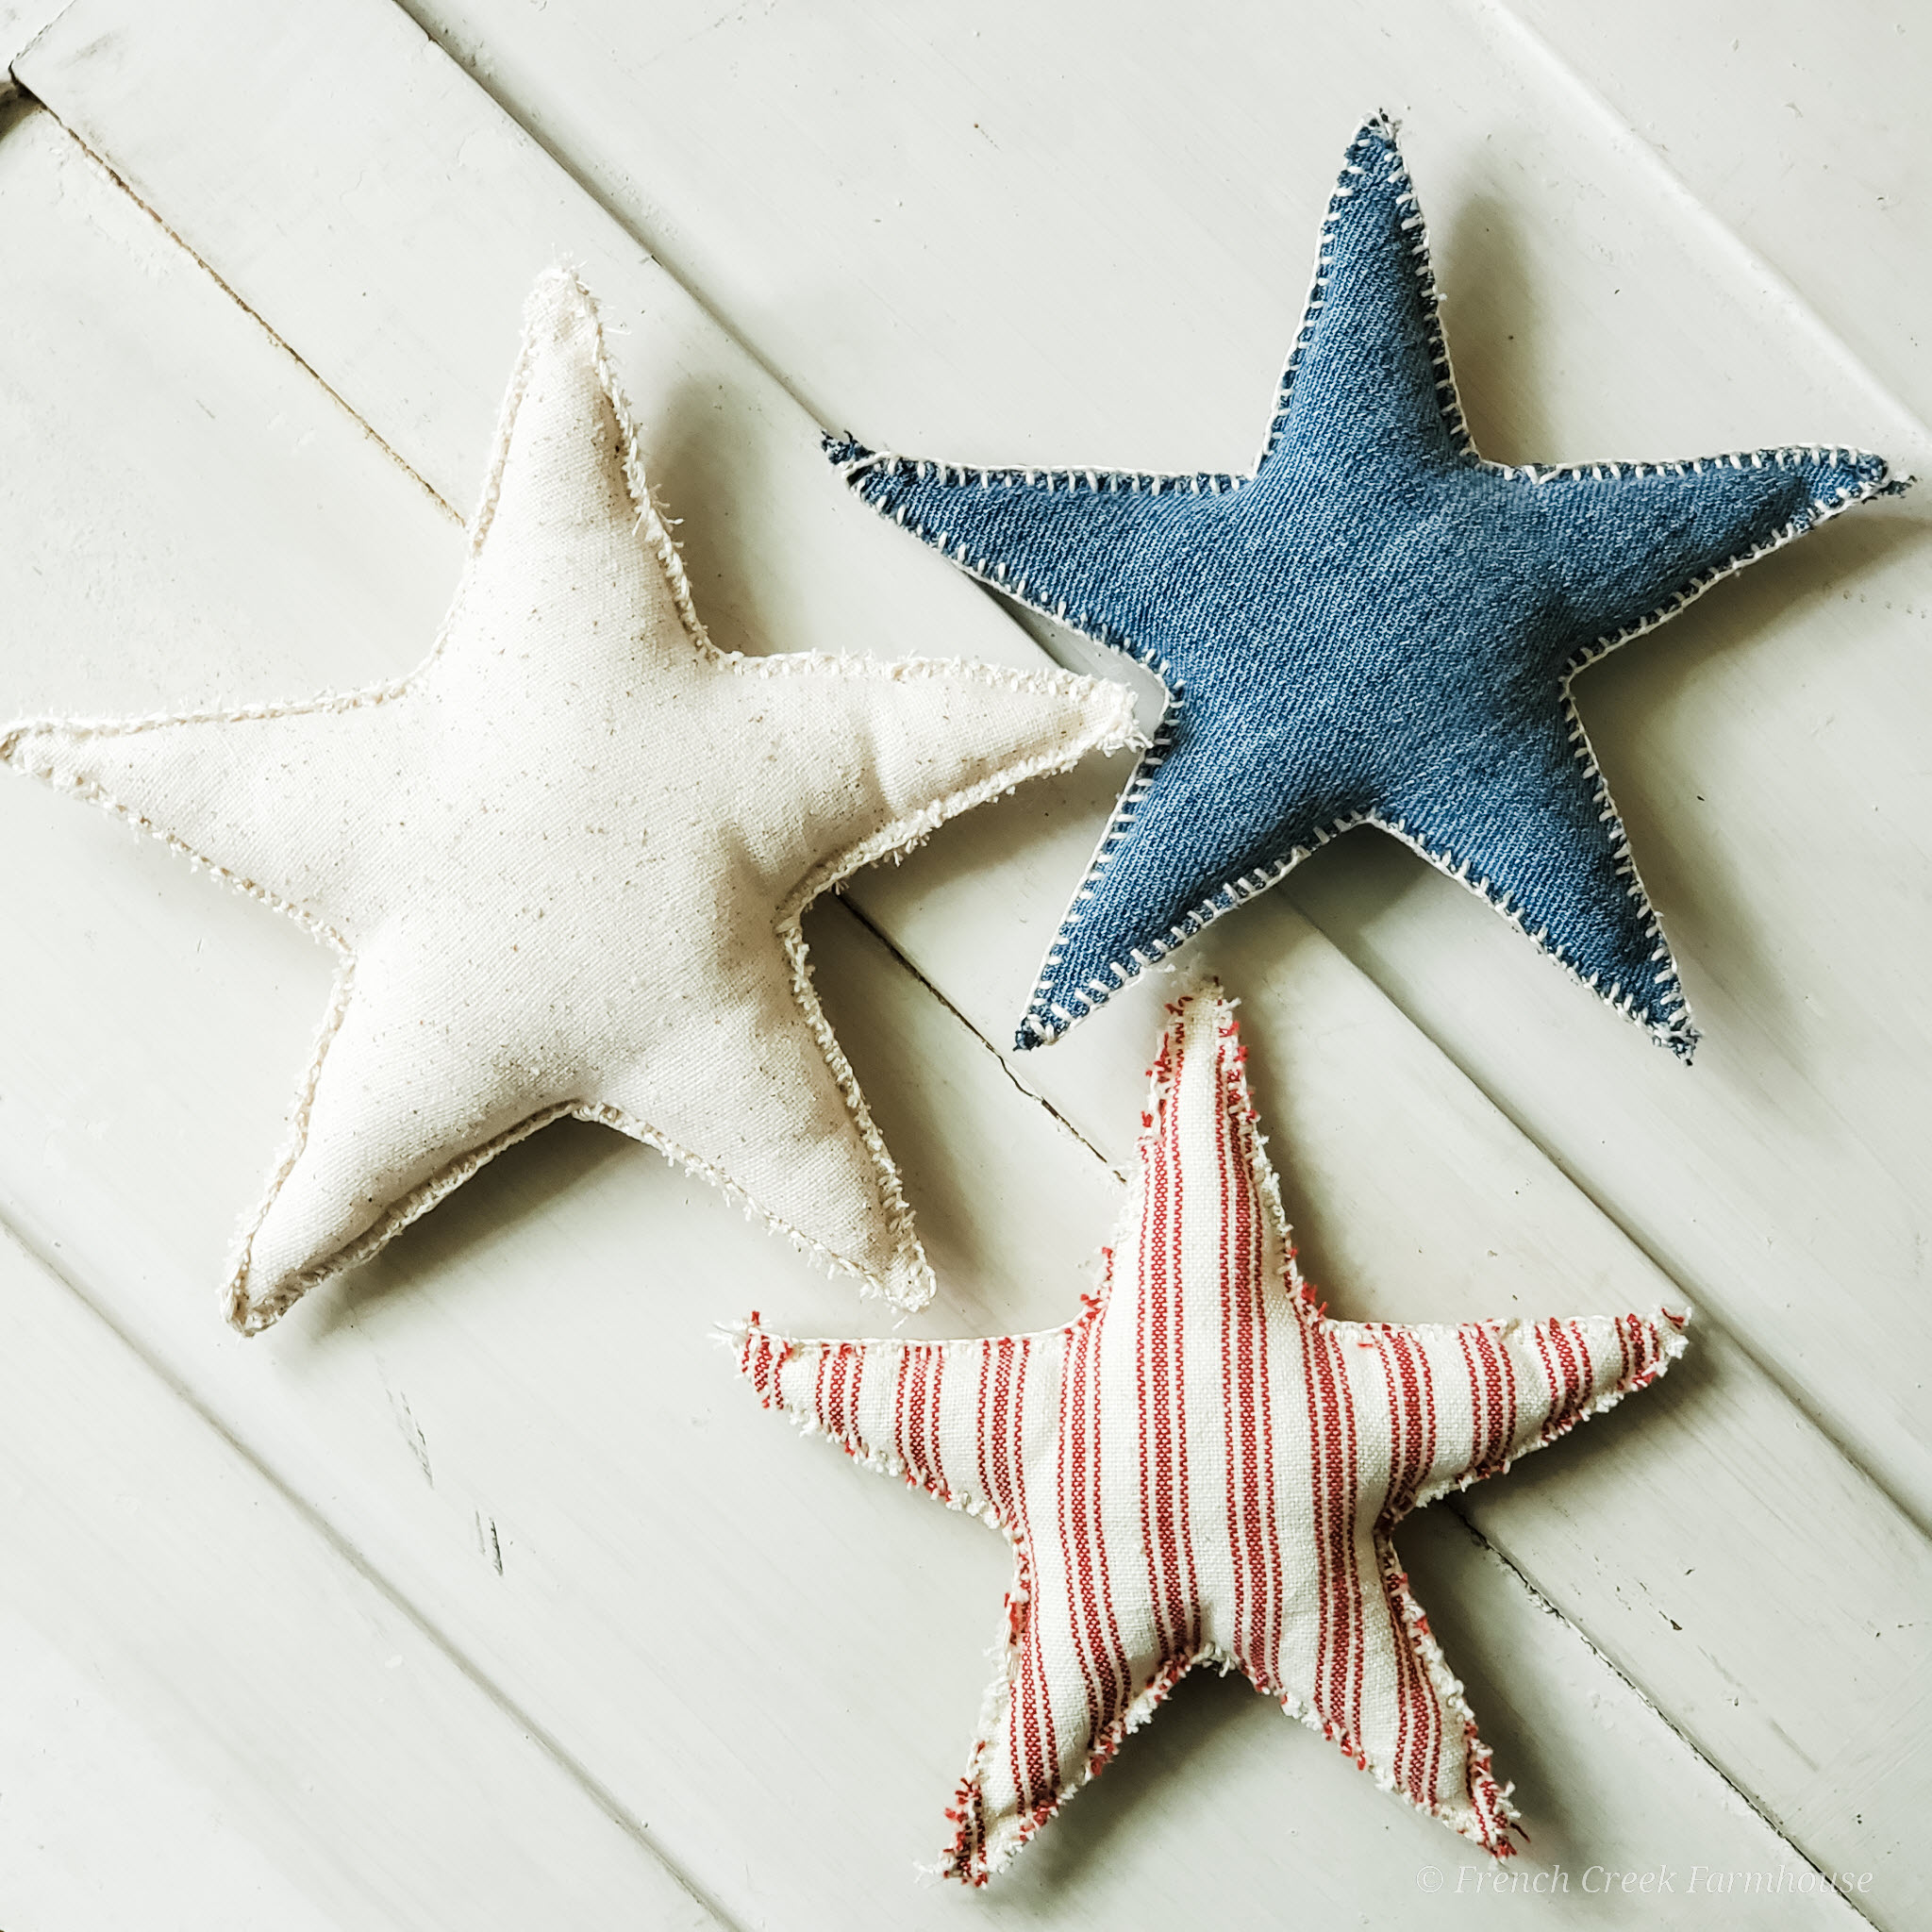 Get the free printable pattern to make these adorable patriotic decor